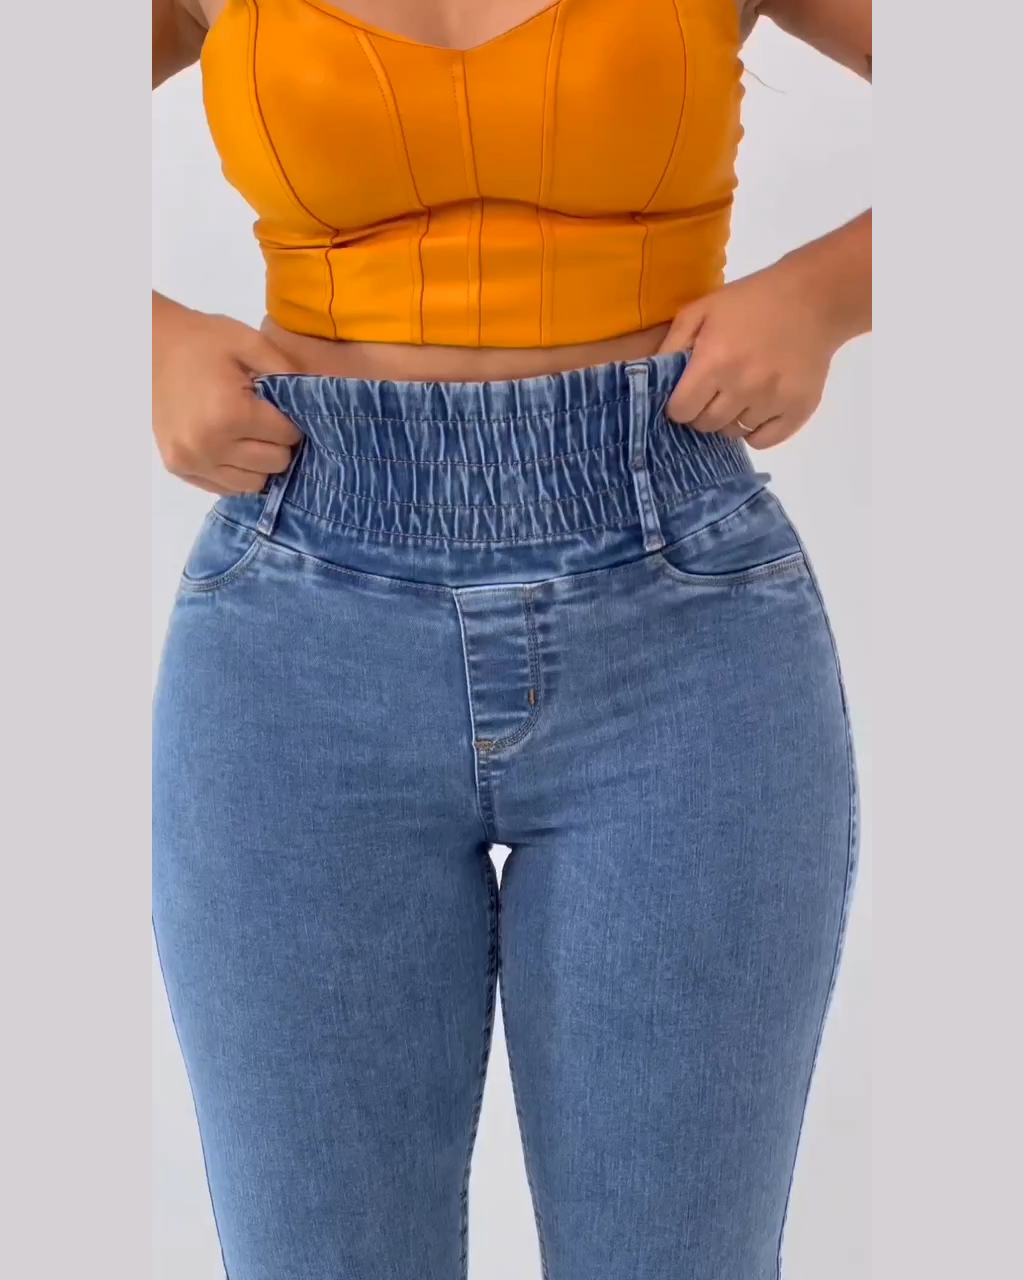 Stretchy Sliming Jeans